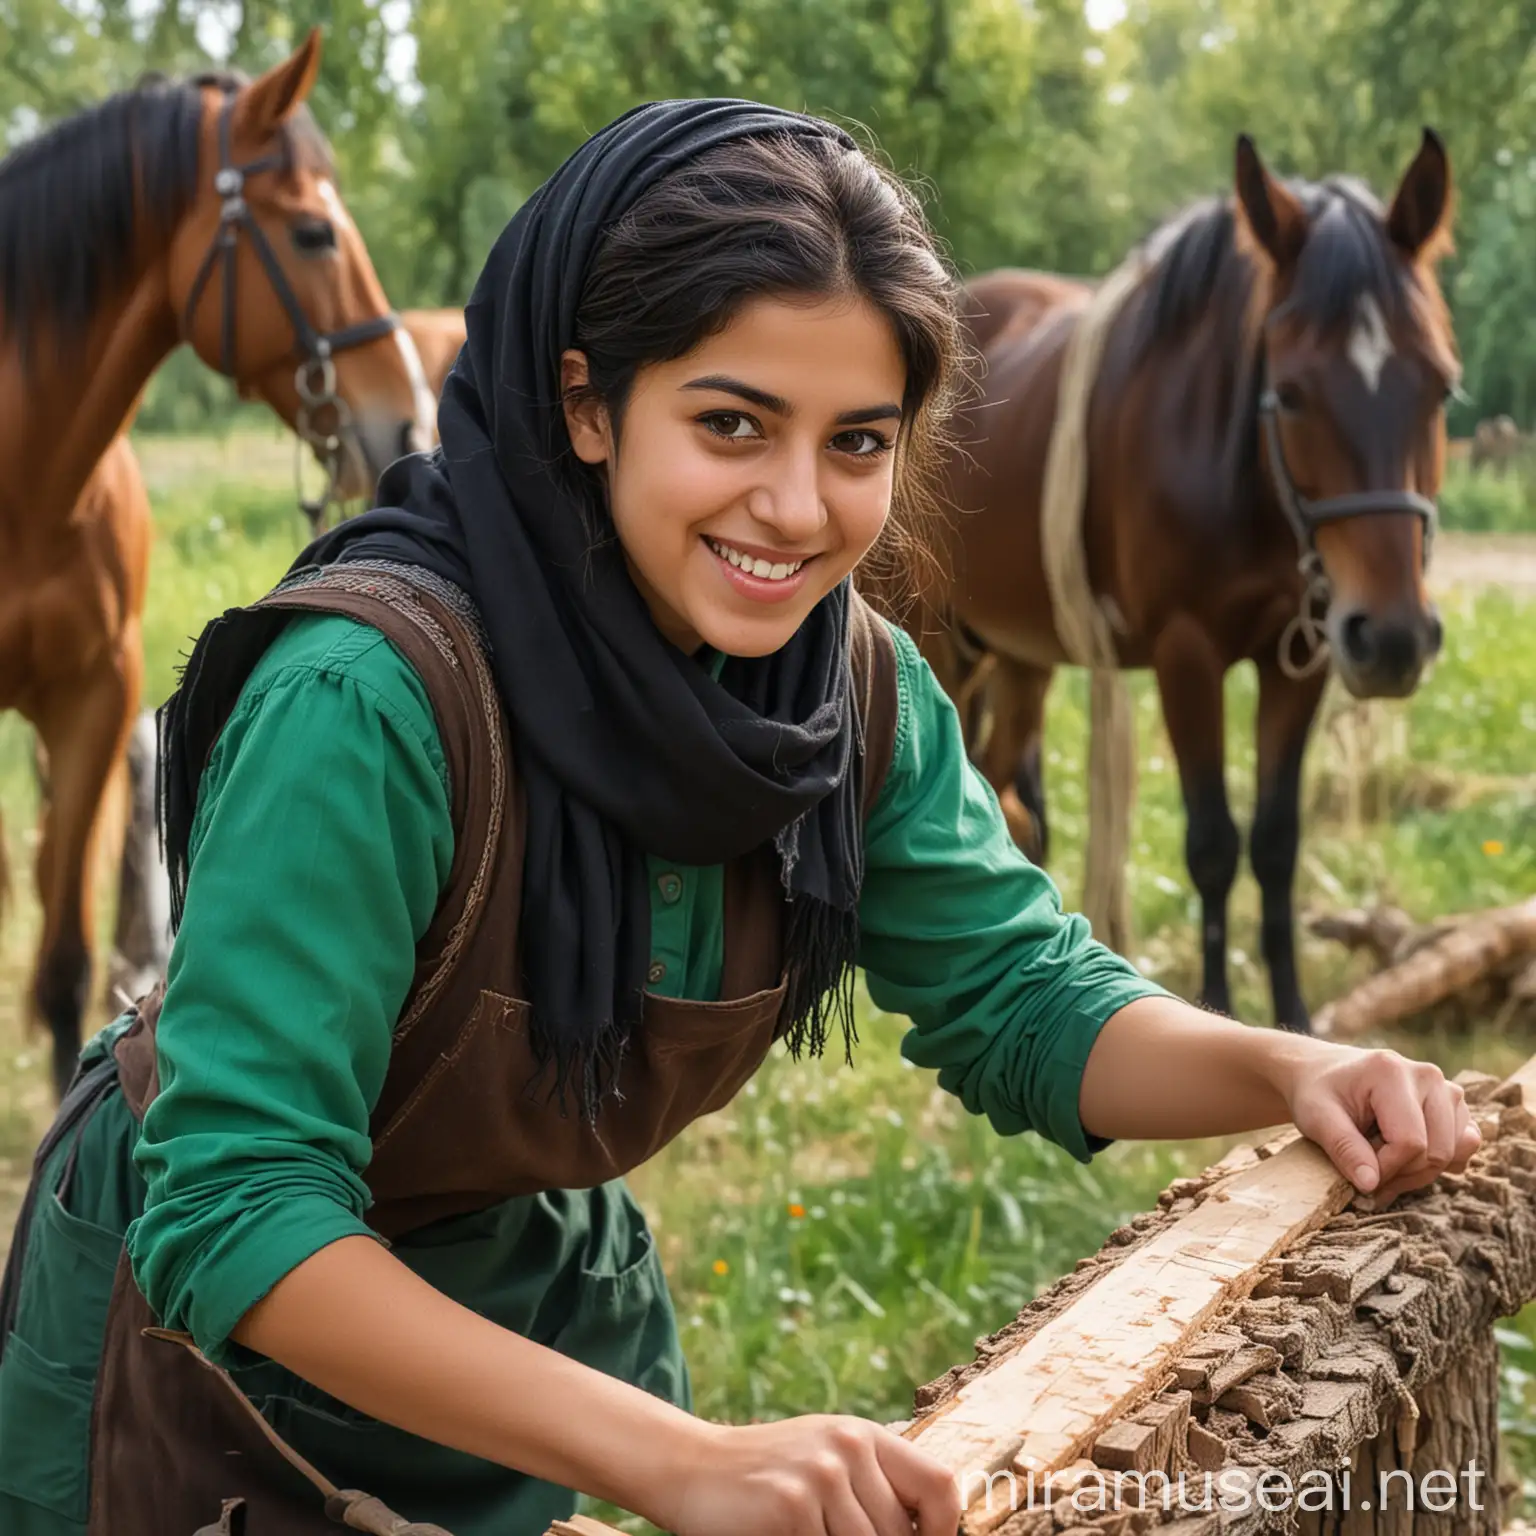 A carpenter girl with an Iranian face wearing a black scarf and a green apron is cutting a piece of wood with a saw in the nature, looking at the camera with a smile, and a horse is grazing in the background.